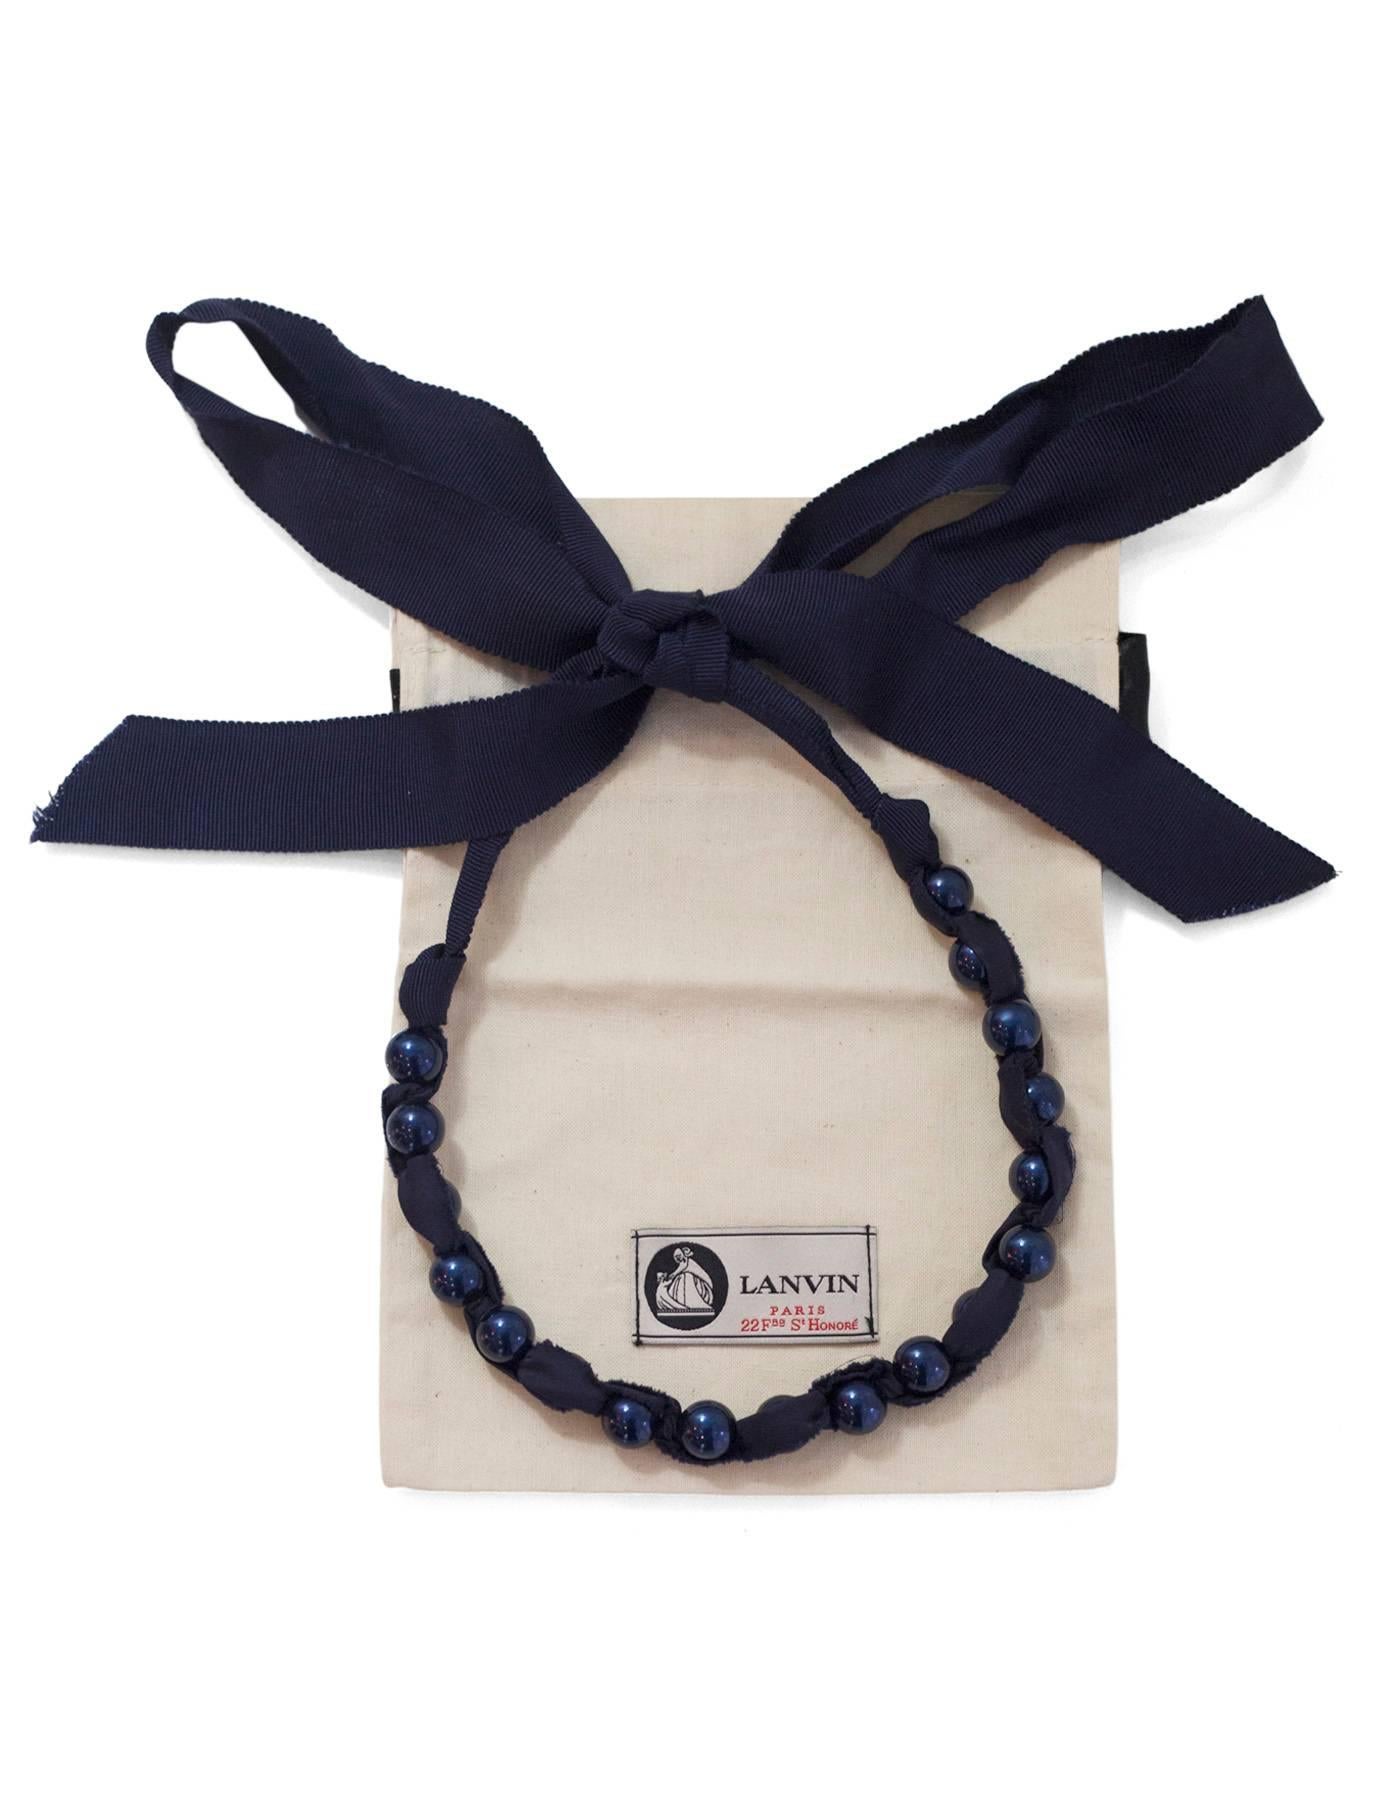 Women's Lanvin Navy Beaded Ribbon Necklace with Dust Bag